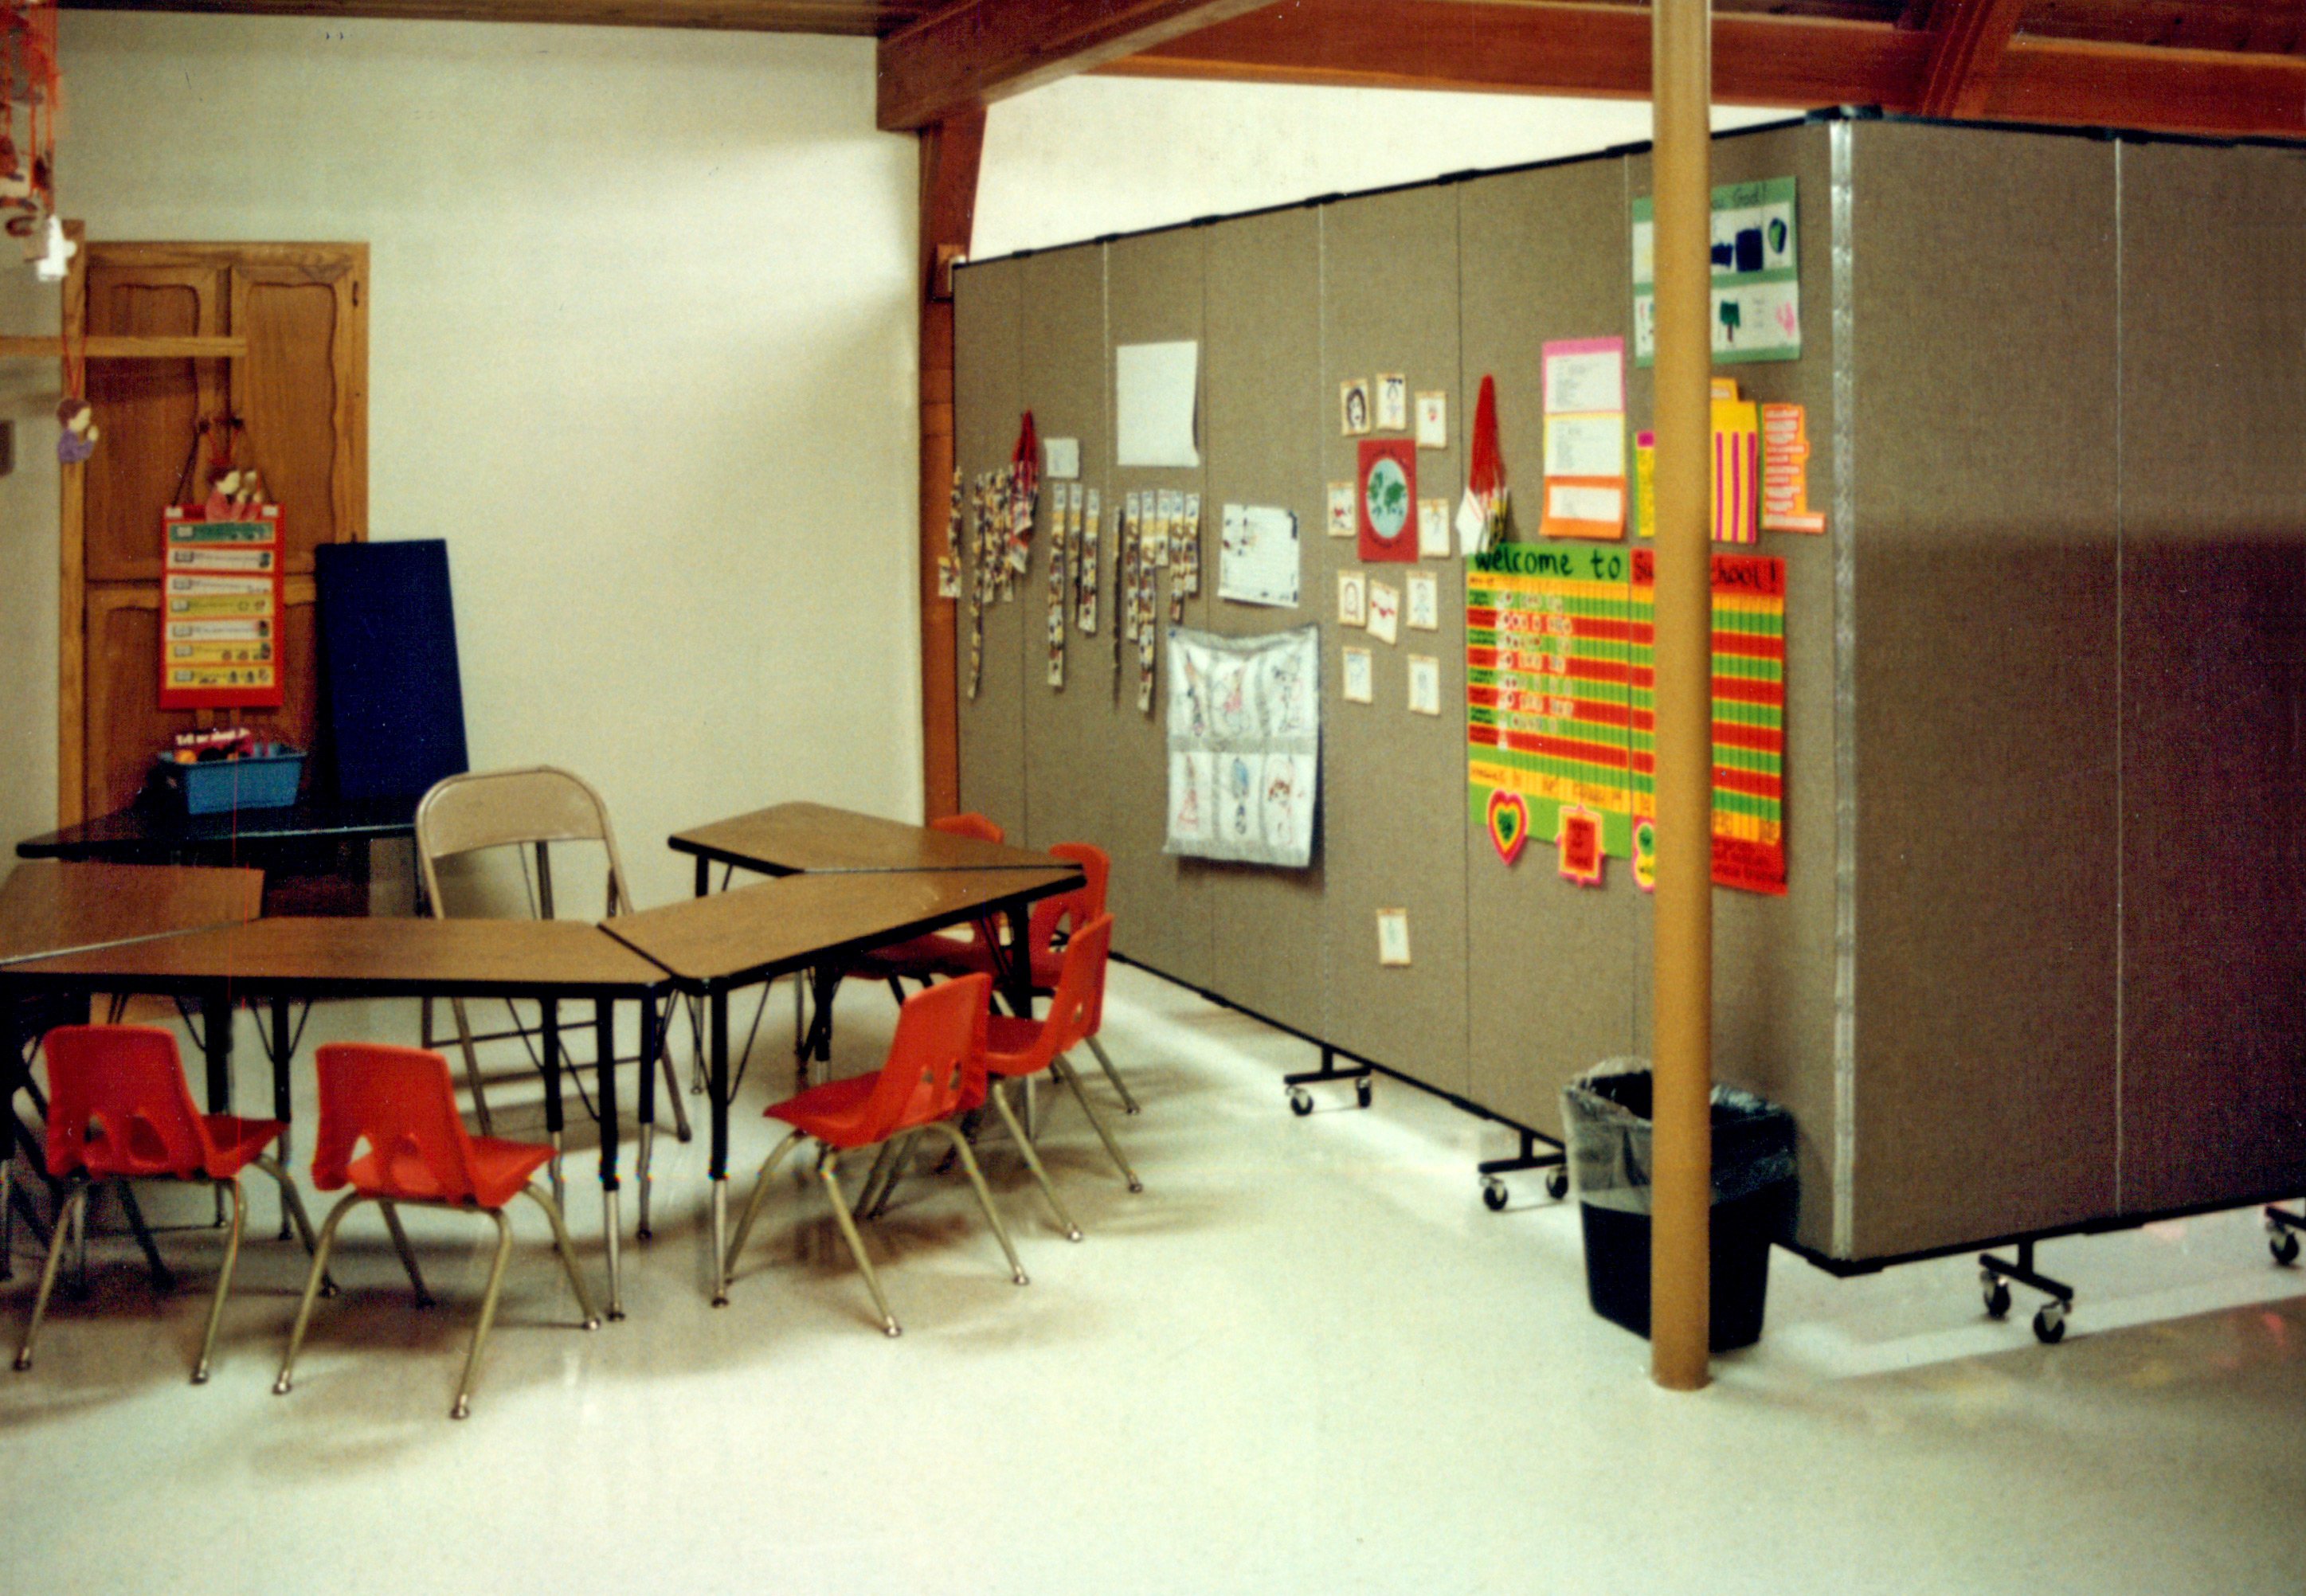 Student tables and chairs next to a room divider panel with educational material tacked to the fabric surface